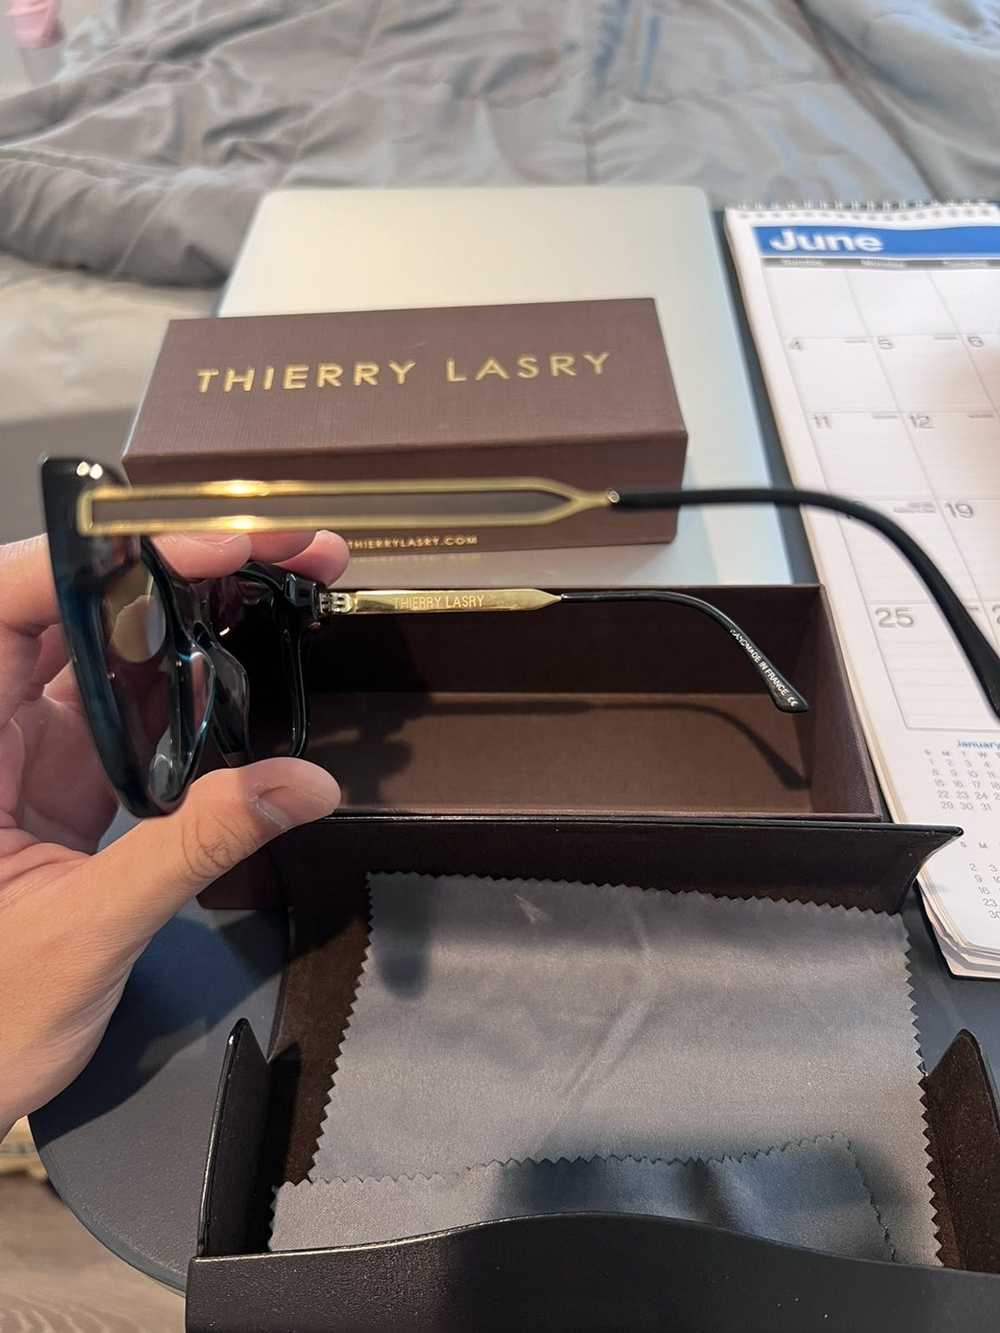 Thierry Lasry Thierry Lasry Sunglasses - image 4